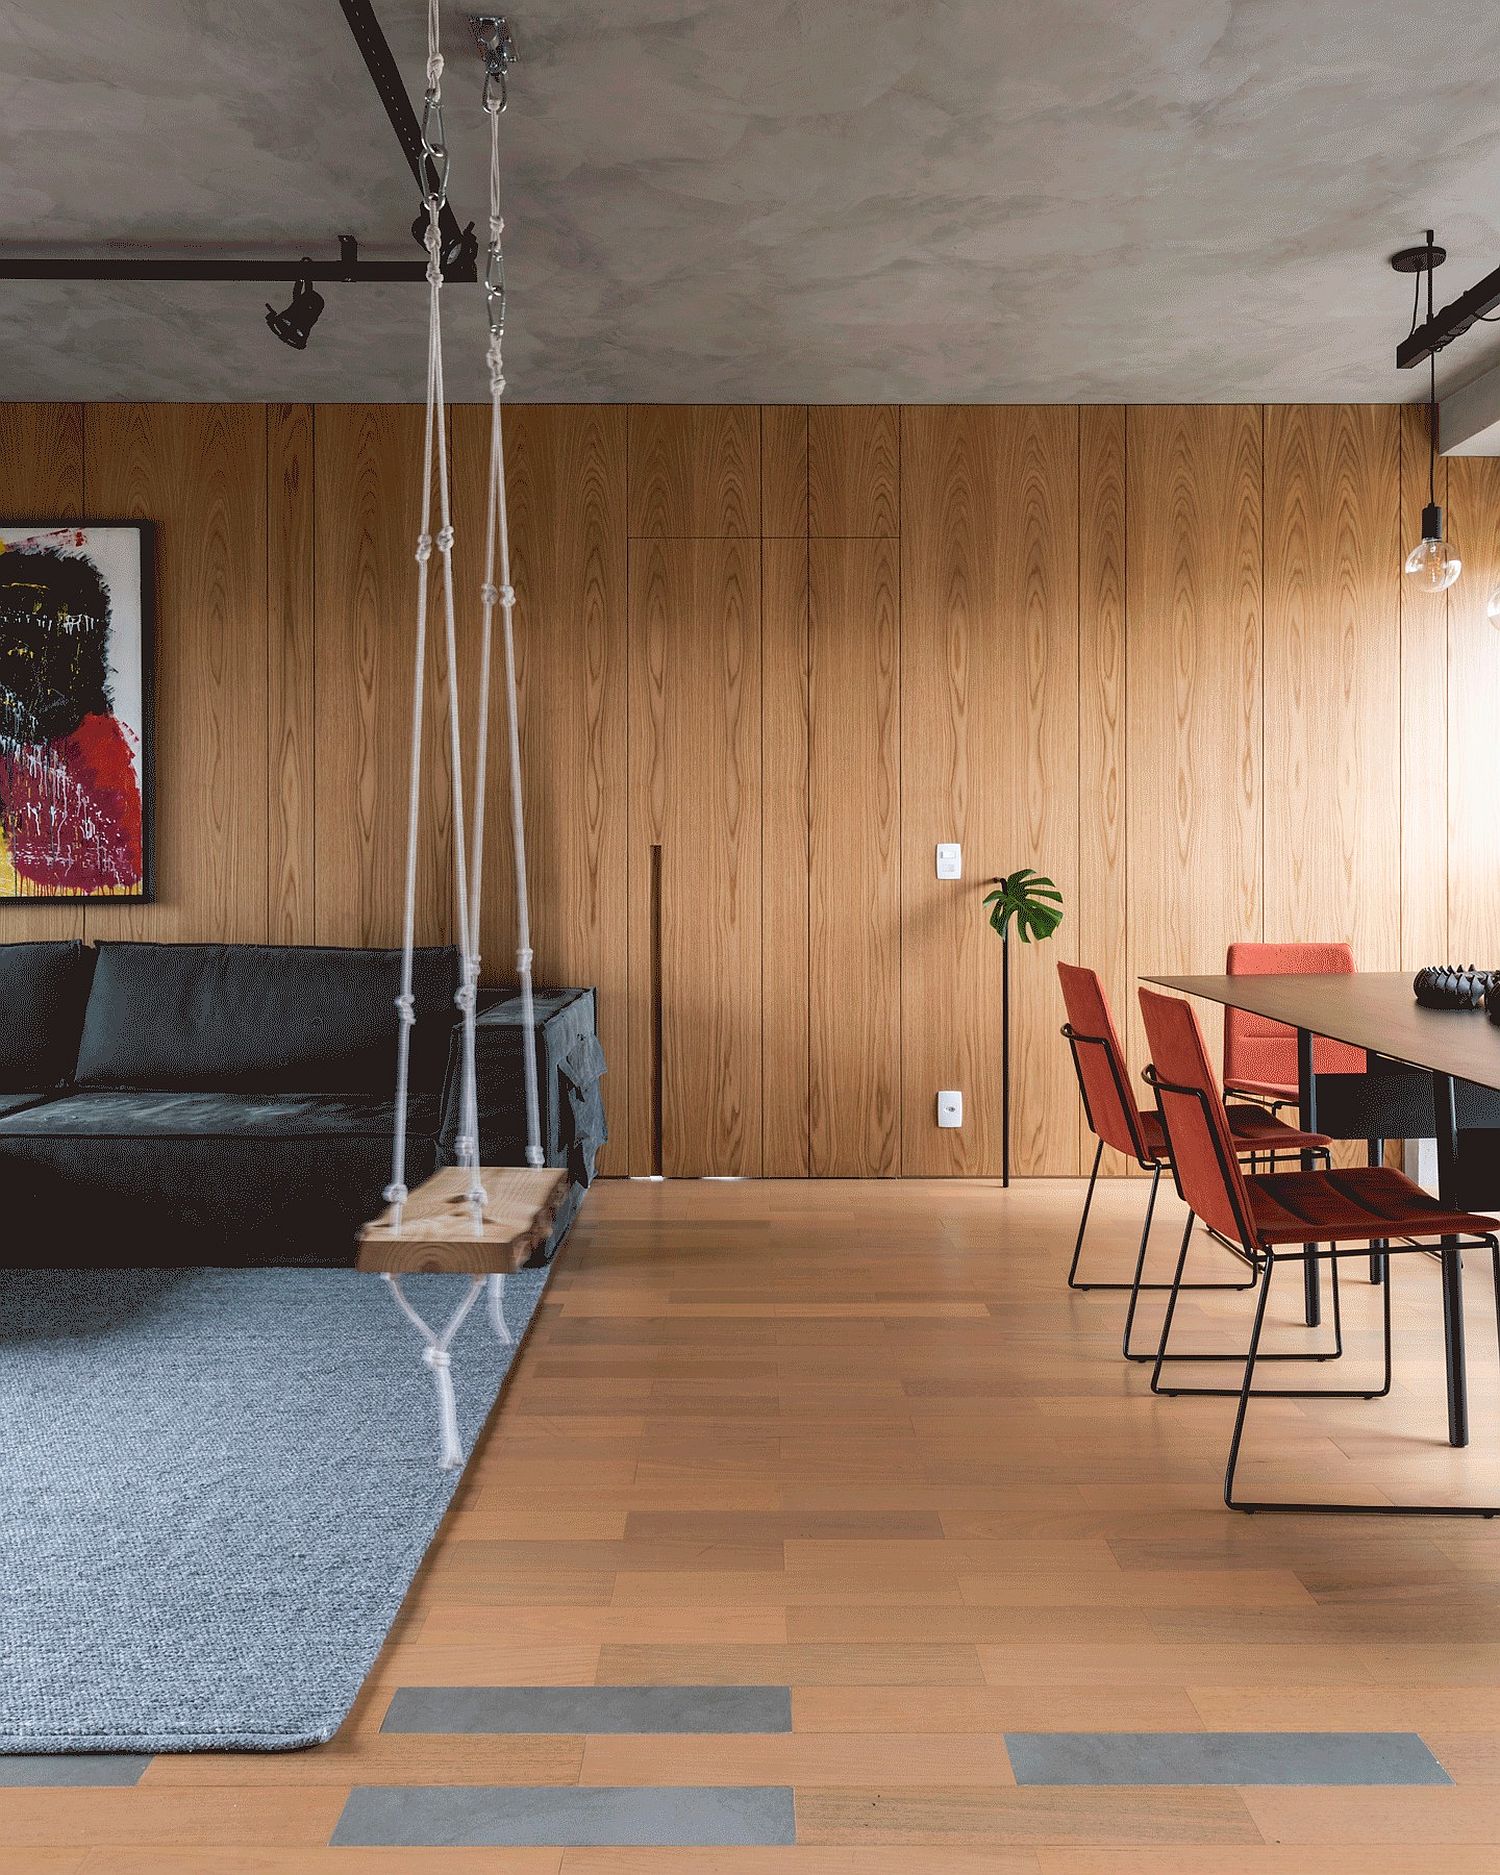 Using-wooden-floor-and-accent-walls-in-the-modern-apartment-living-room-in-style-15428